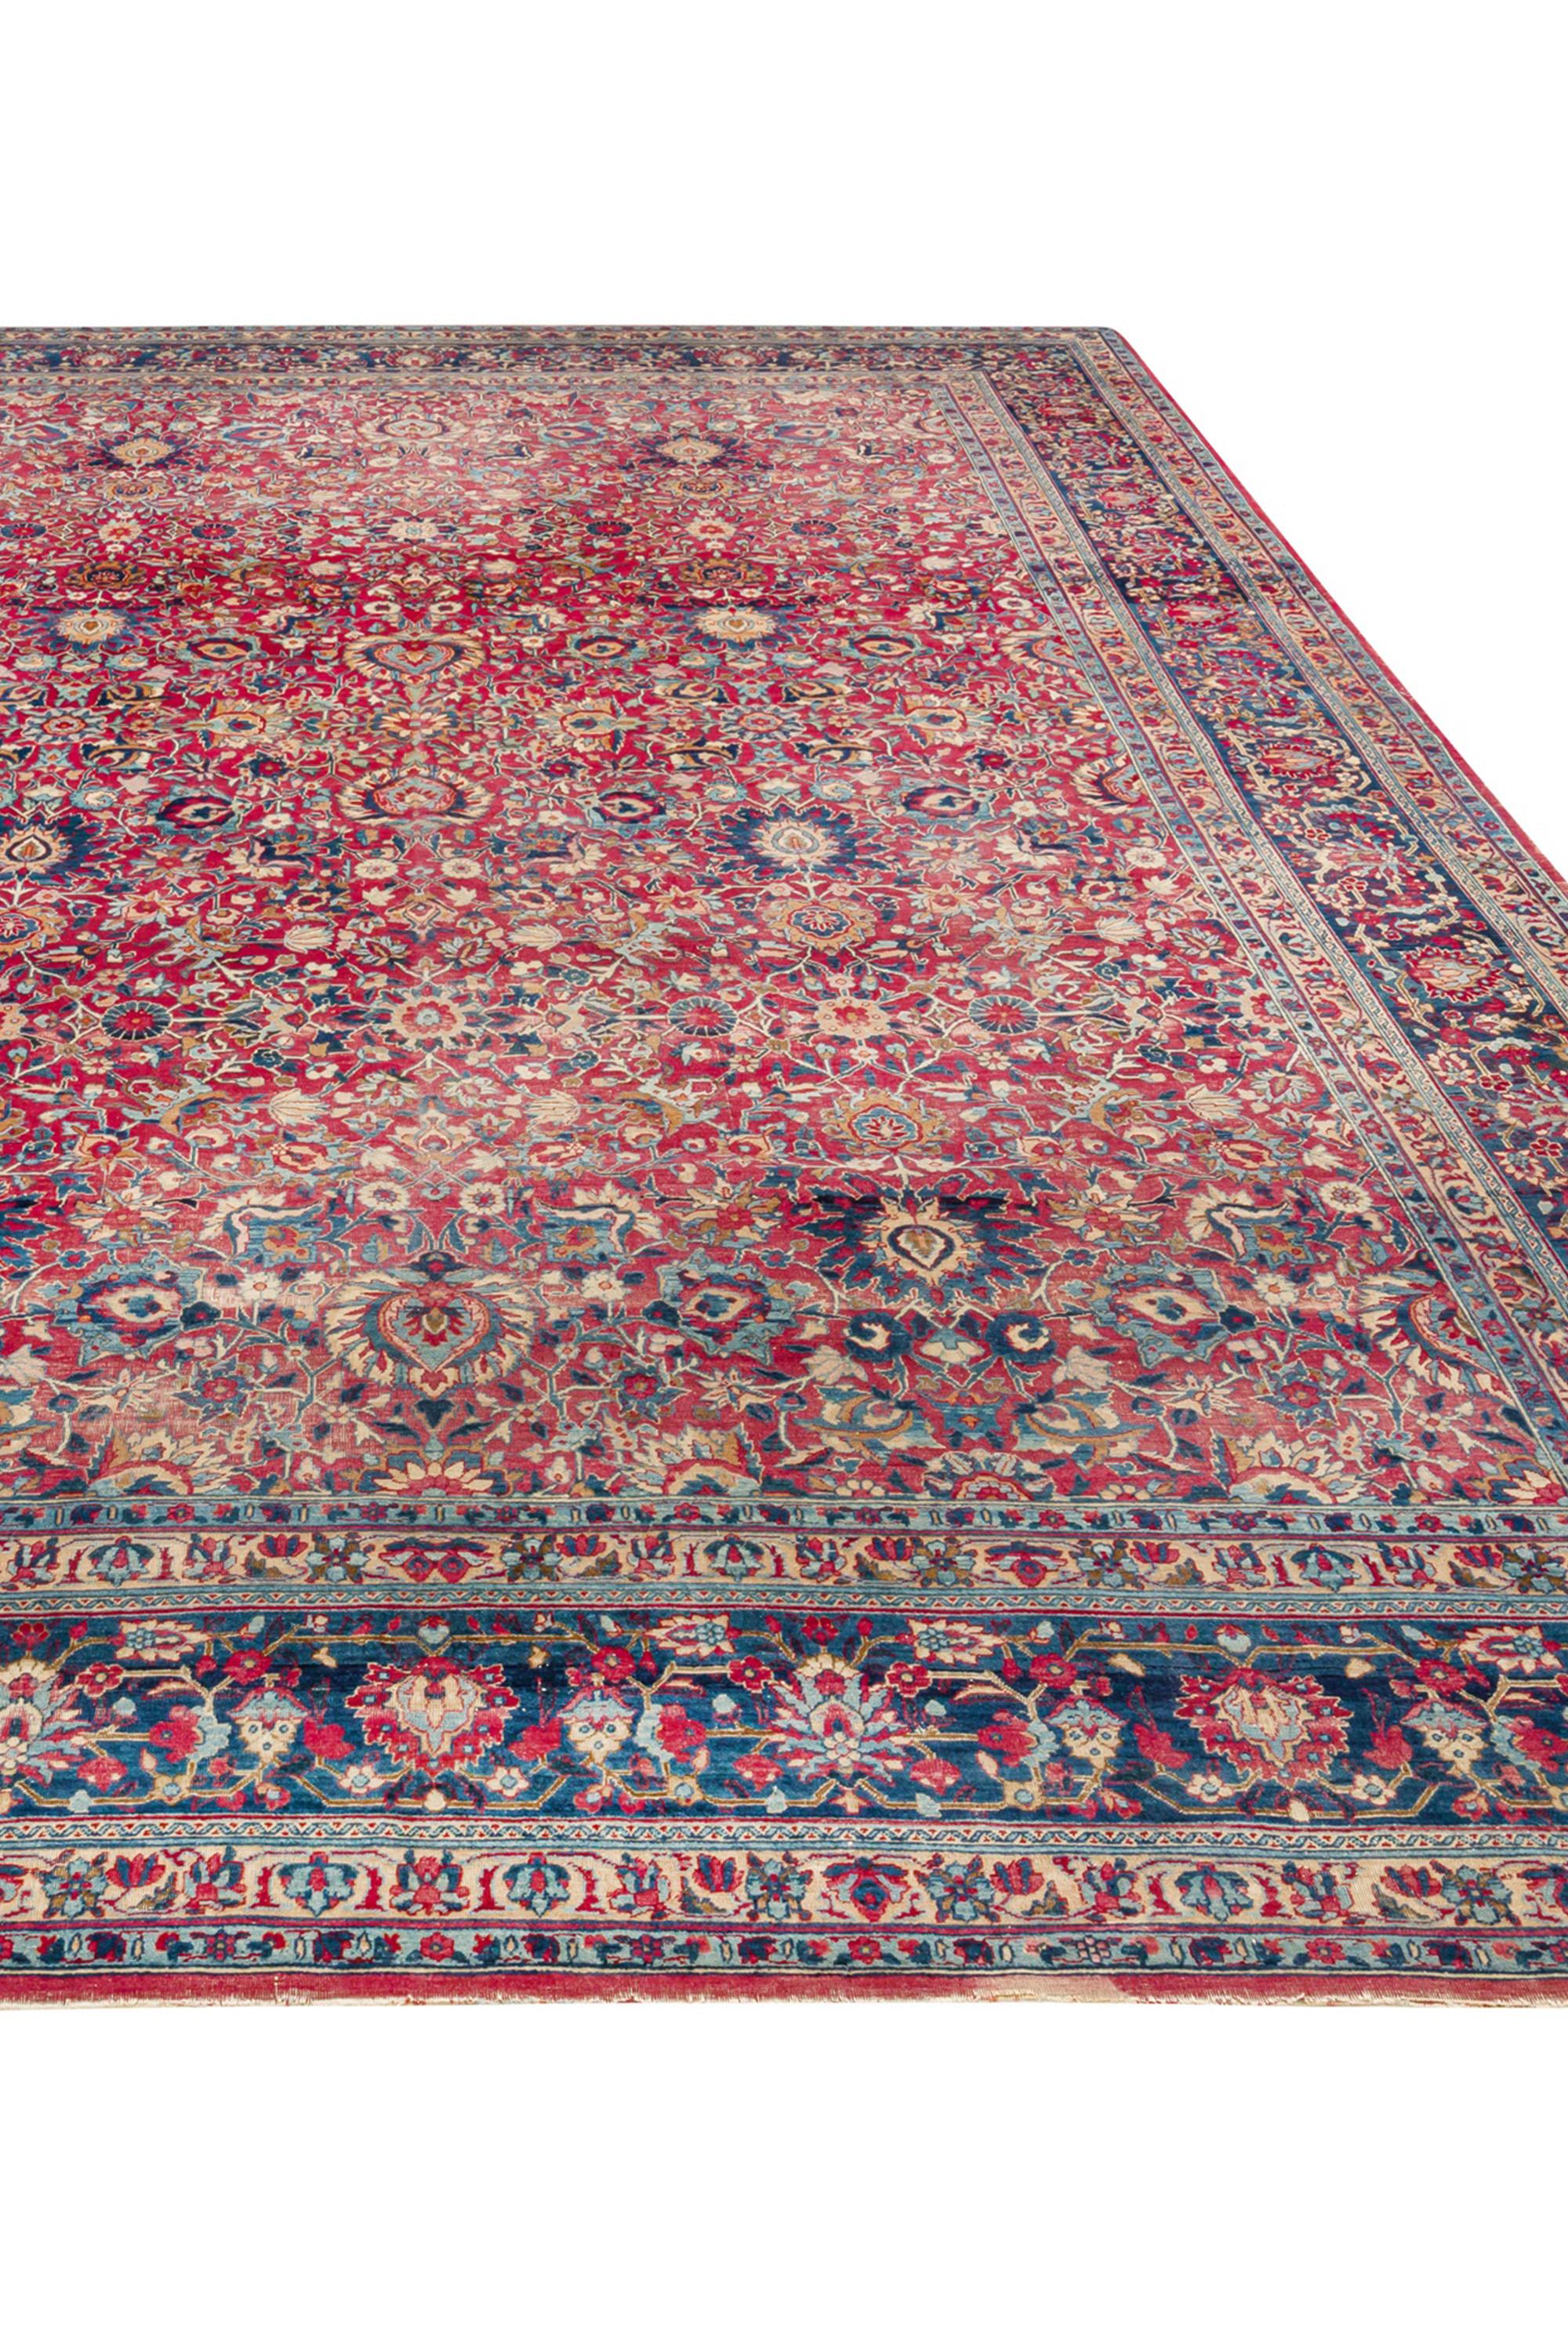 Hand-Woven A Large Antique Tabriz Carpet, North West Persia For Sale